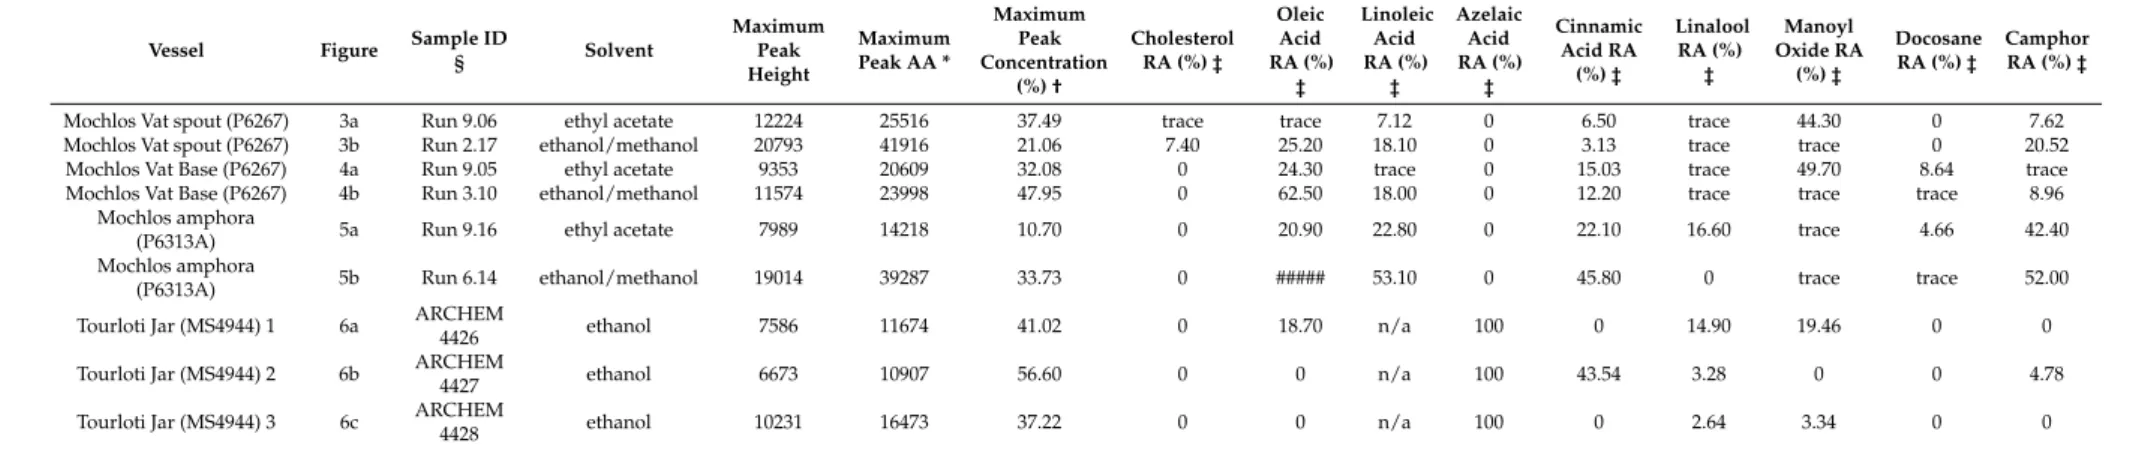 Table 1. Gas Chromatography-Mass Spectrometry data from Tourloti and Mochlos vessels.